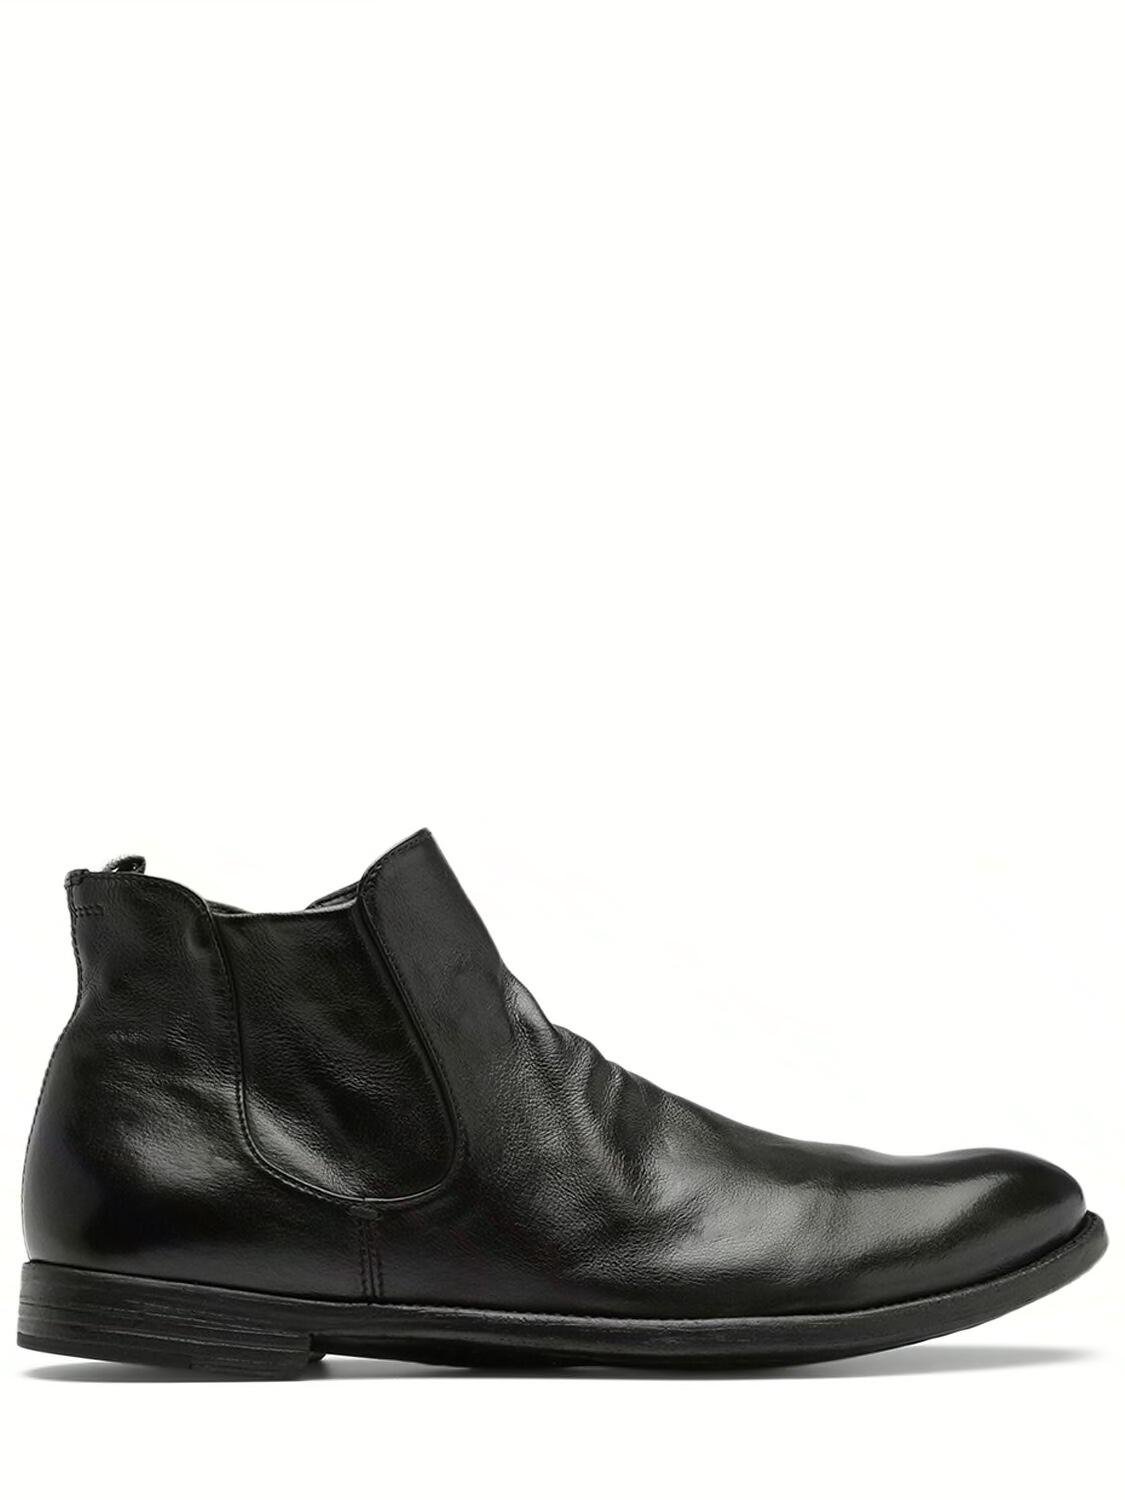 Ingnis Leather Ankle Boots by OFFICINE CREATIVE